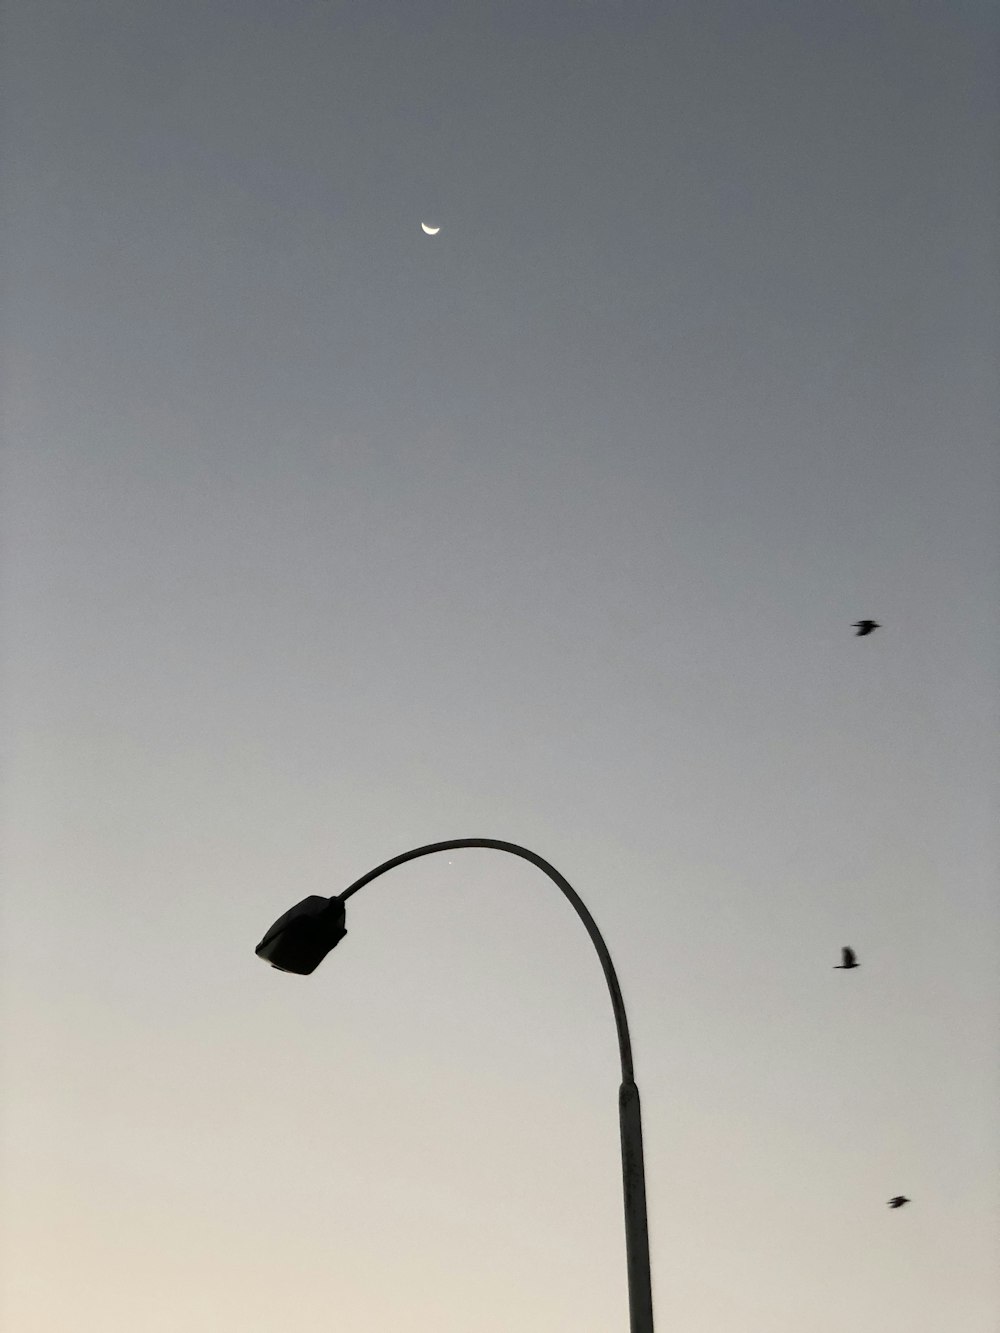 a street light and birds flying in the sky